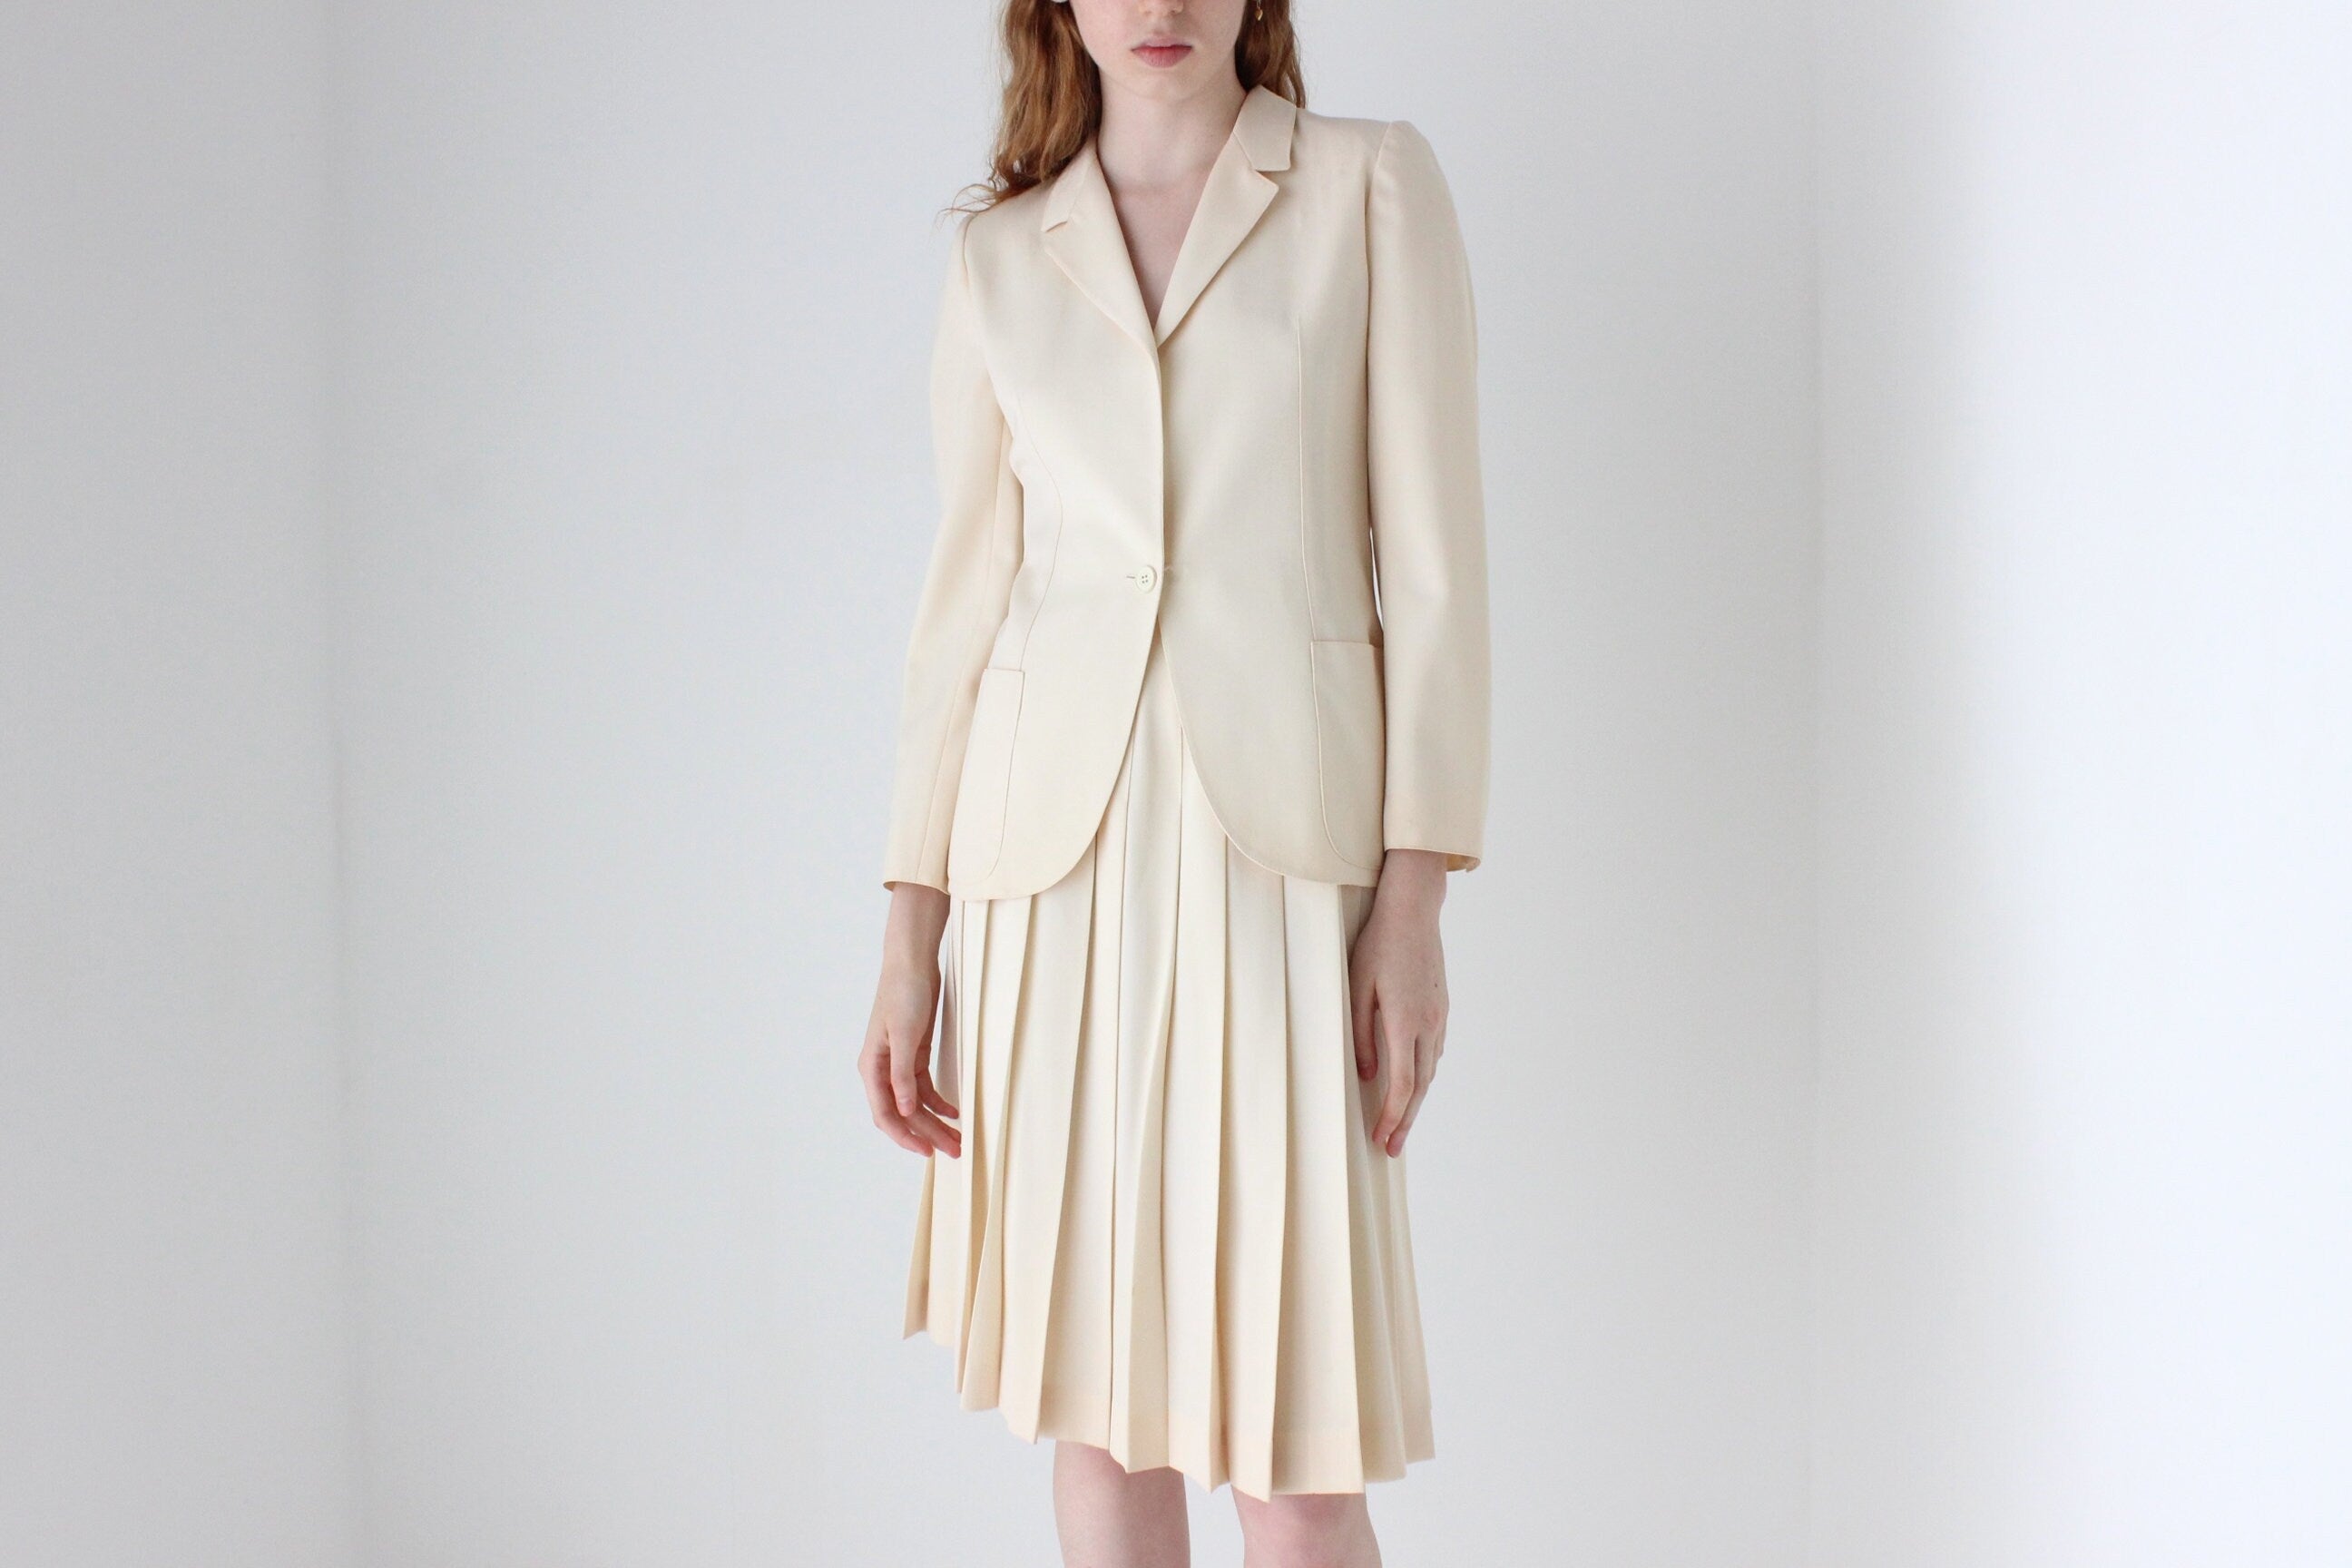 1970s Krizia Italy Cream Wool Two Piece Bridal Skirt Suit